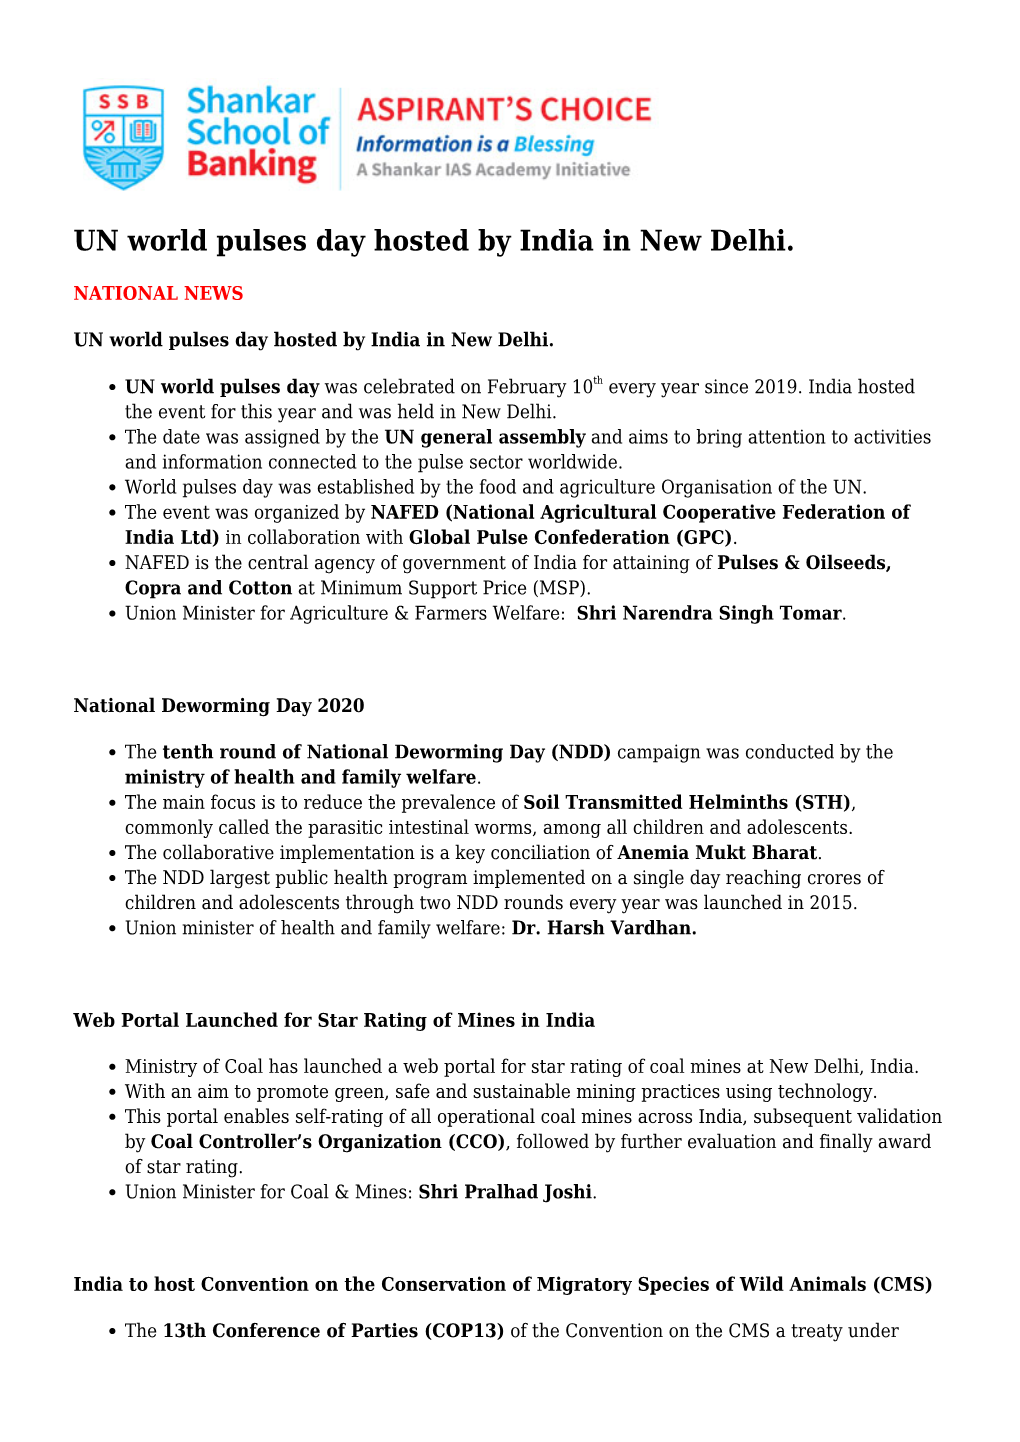 UN World Pulses Day Hosted by India in New Delhi